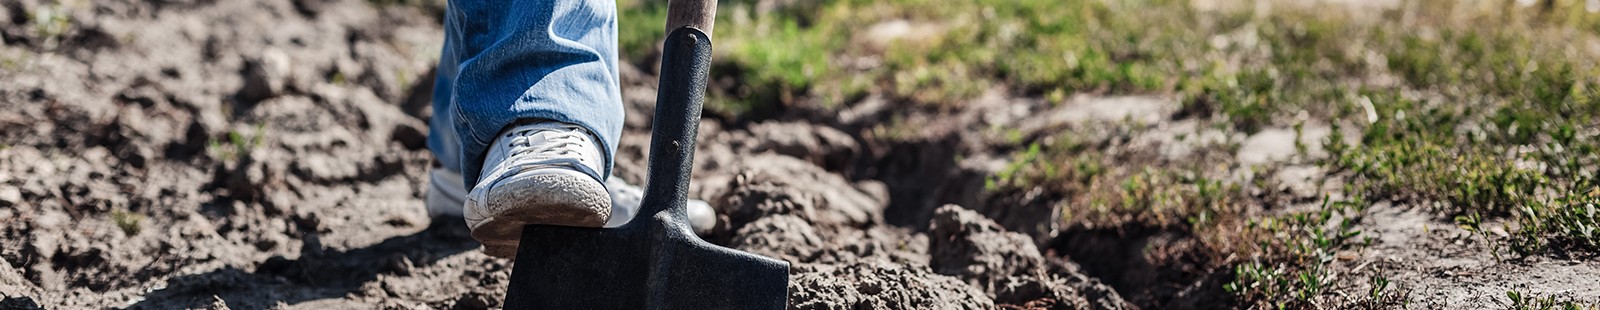 man digging in dirt with shovel